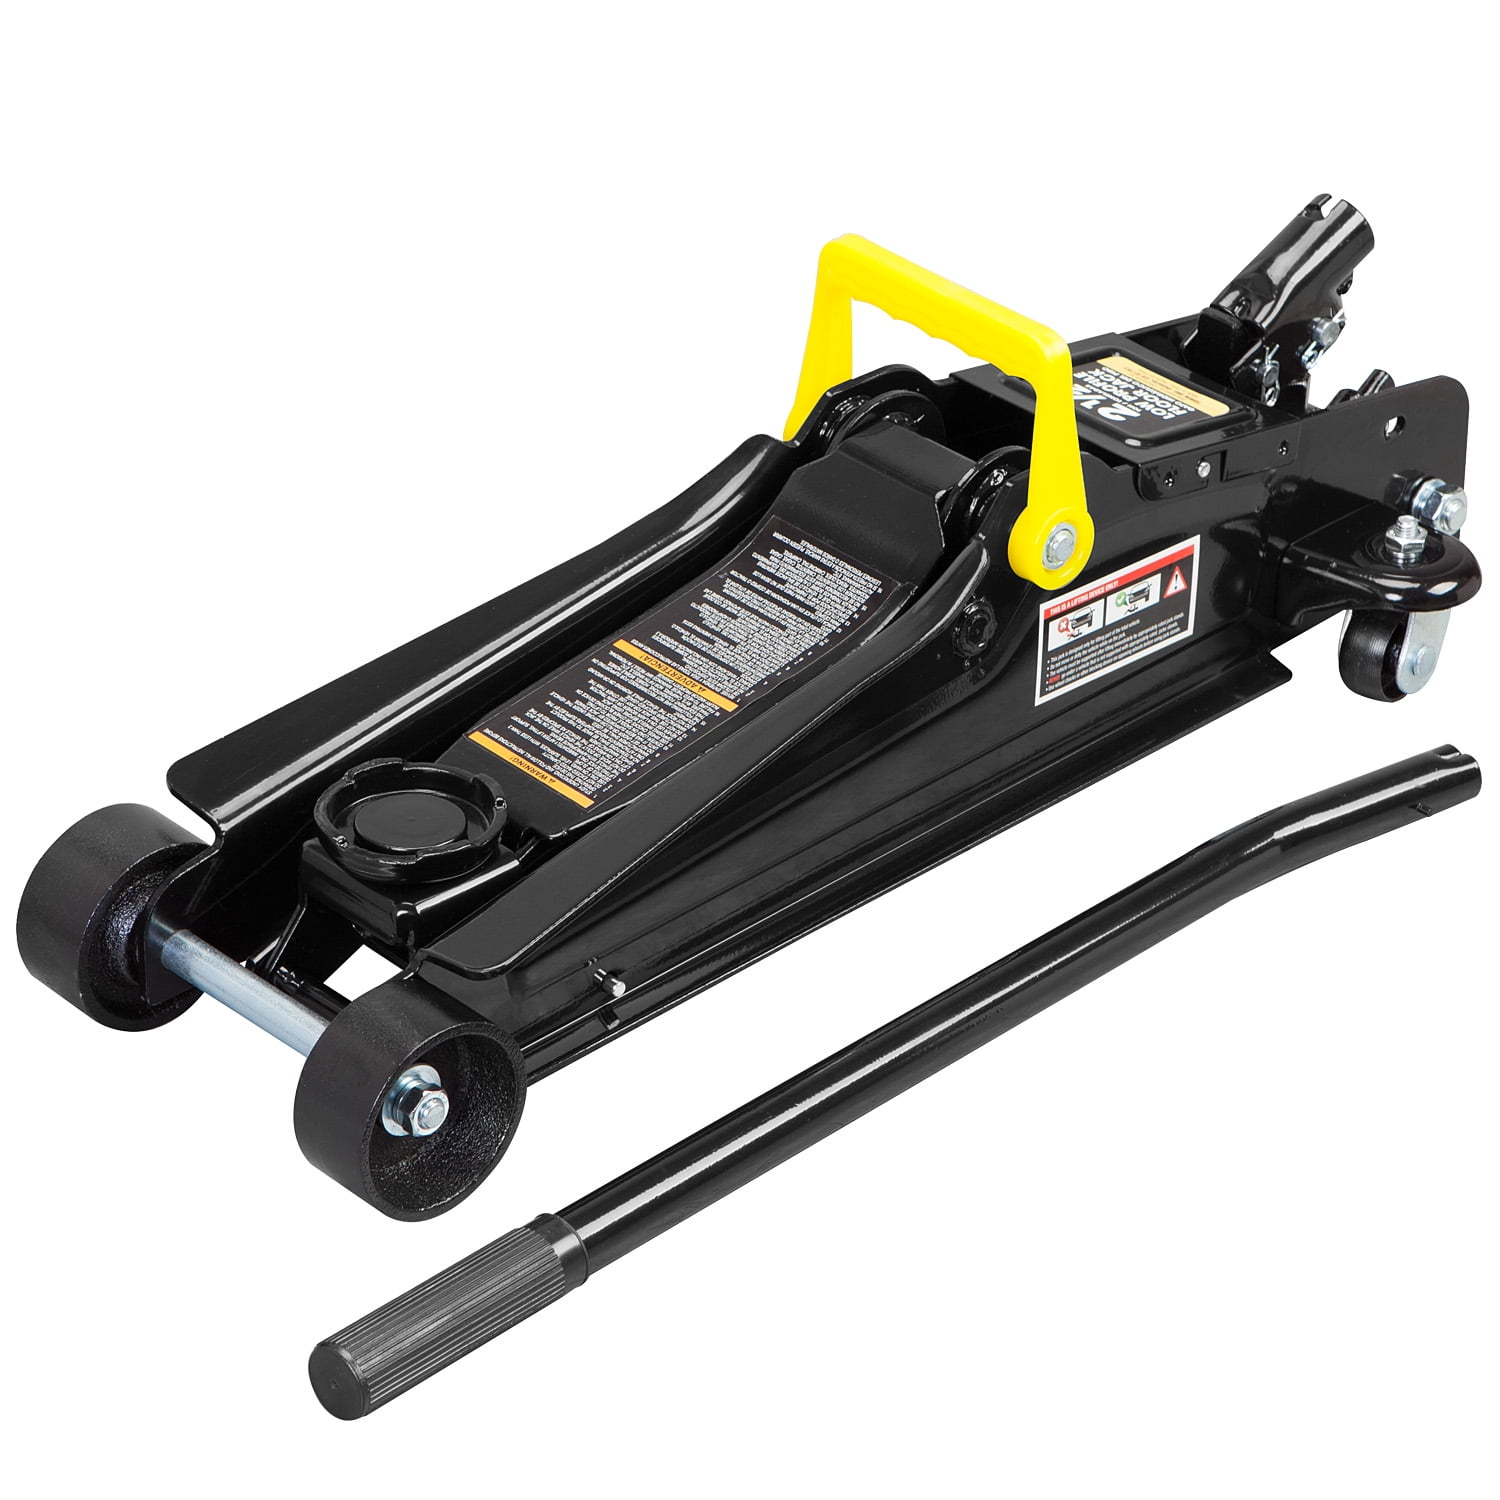 2 Ton Torin AT82001B Hydraulic Trolley Service/Floor Jack Combo with 2 Jack Stands Capacity 4,000 lb Black 